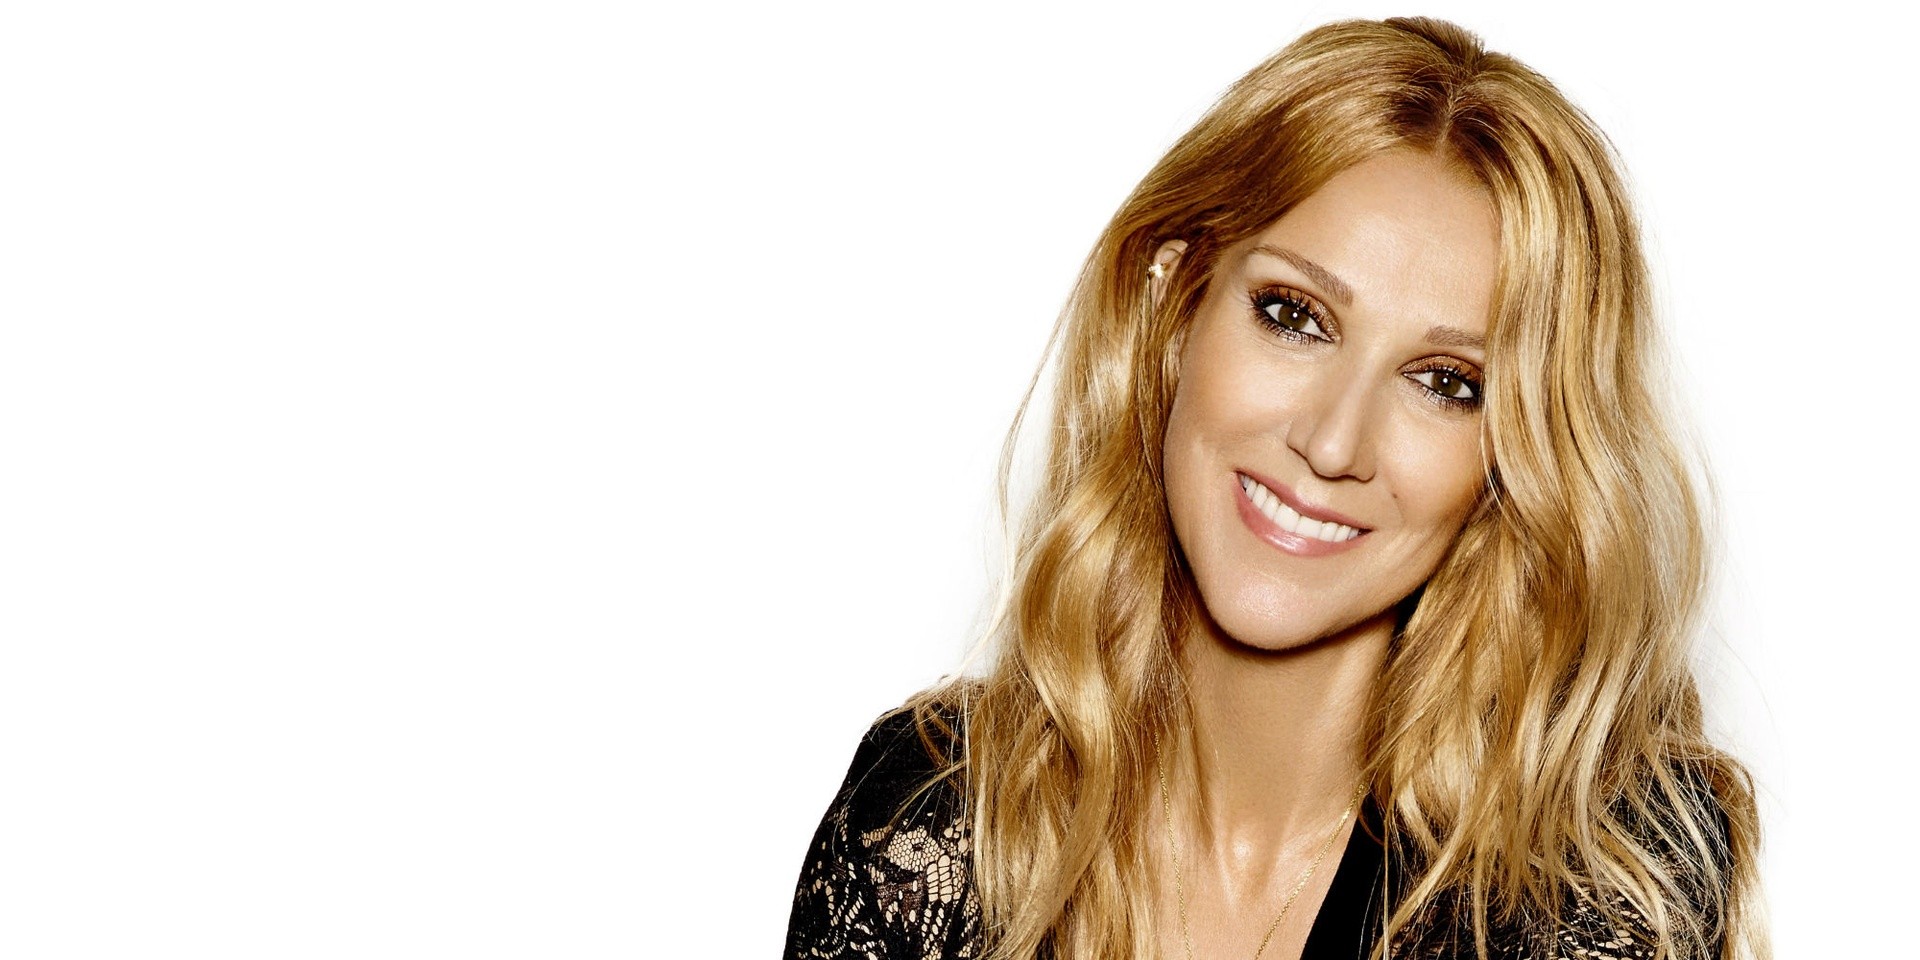 A new Celine Dion biopic titled The Power Of Love has been announced 